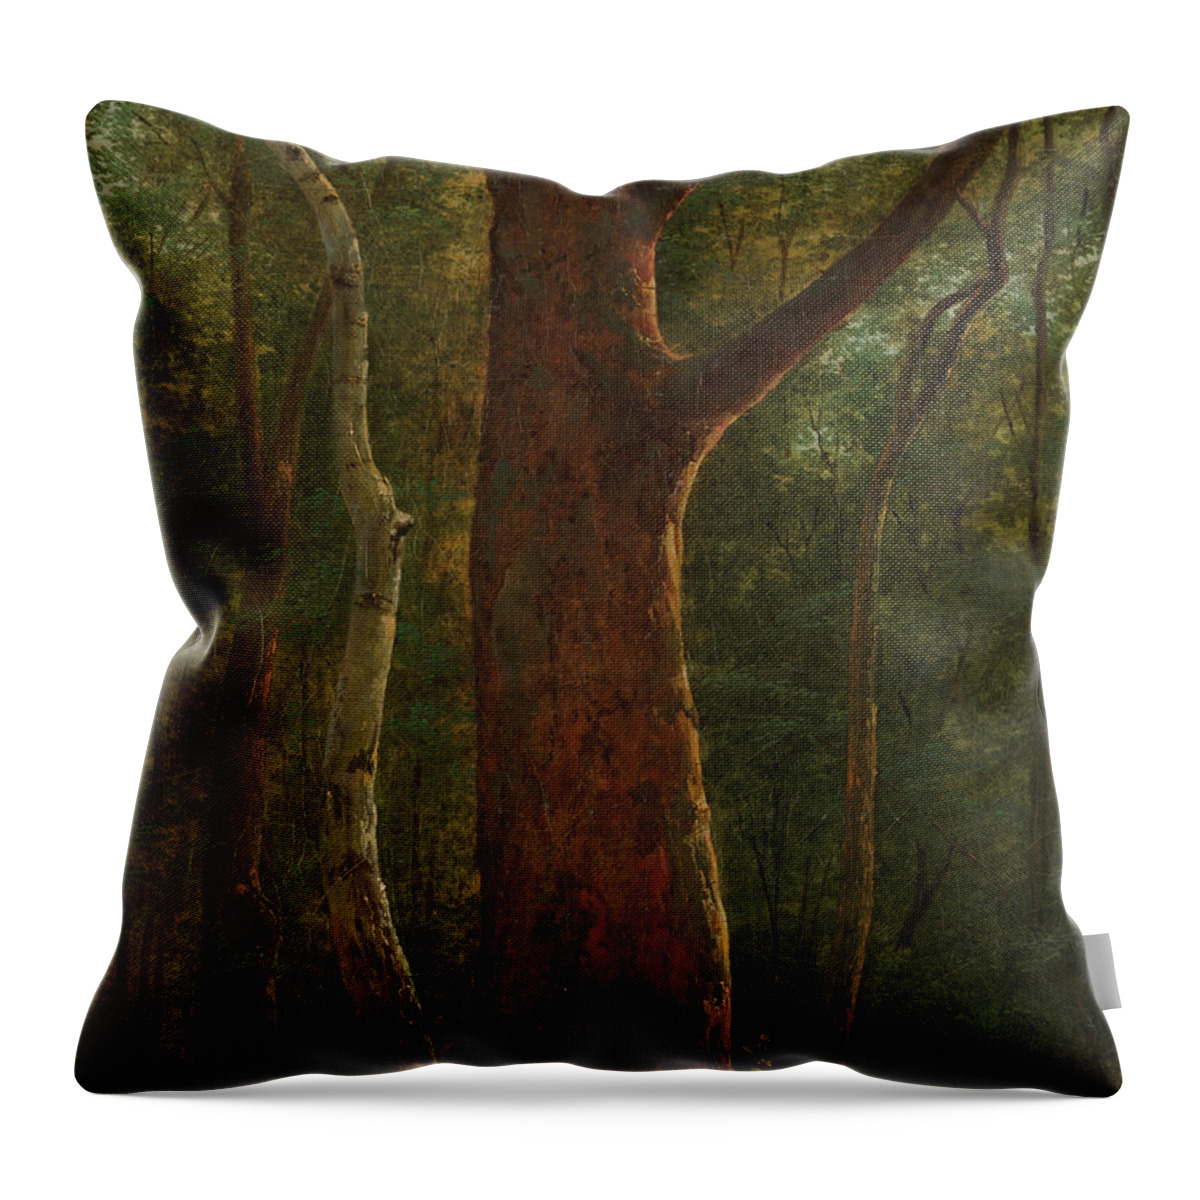 Achille-etna Michallon Throw Pillow featuring the painting Beech Tree by Celestial Images